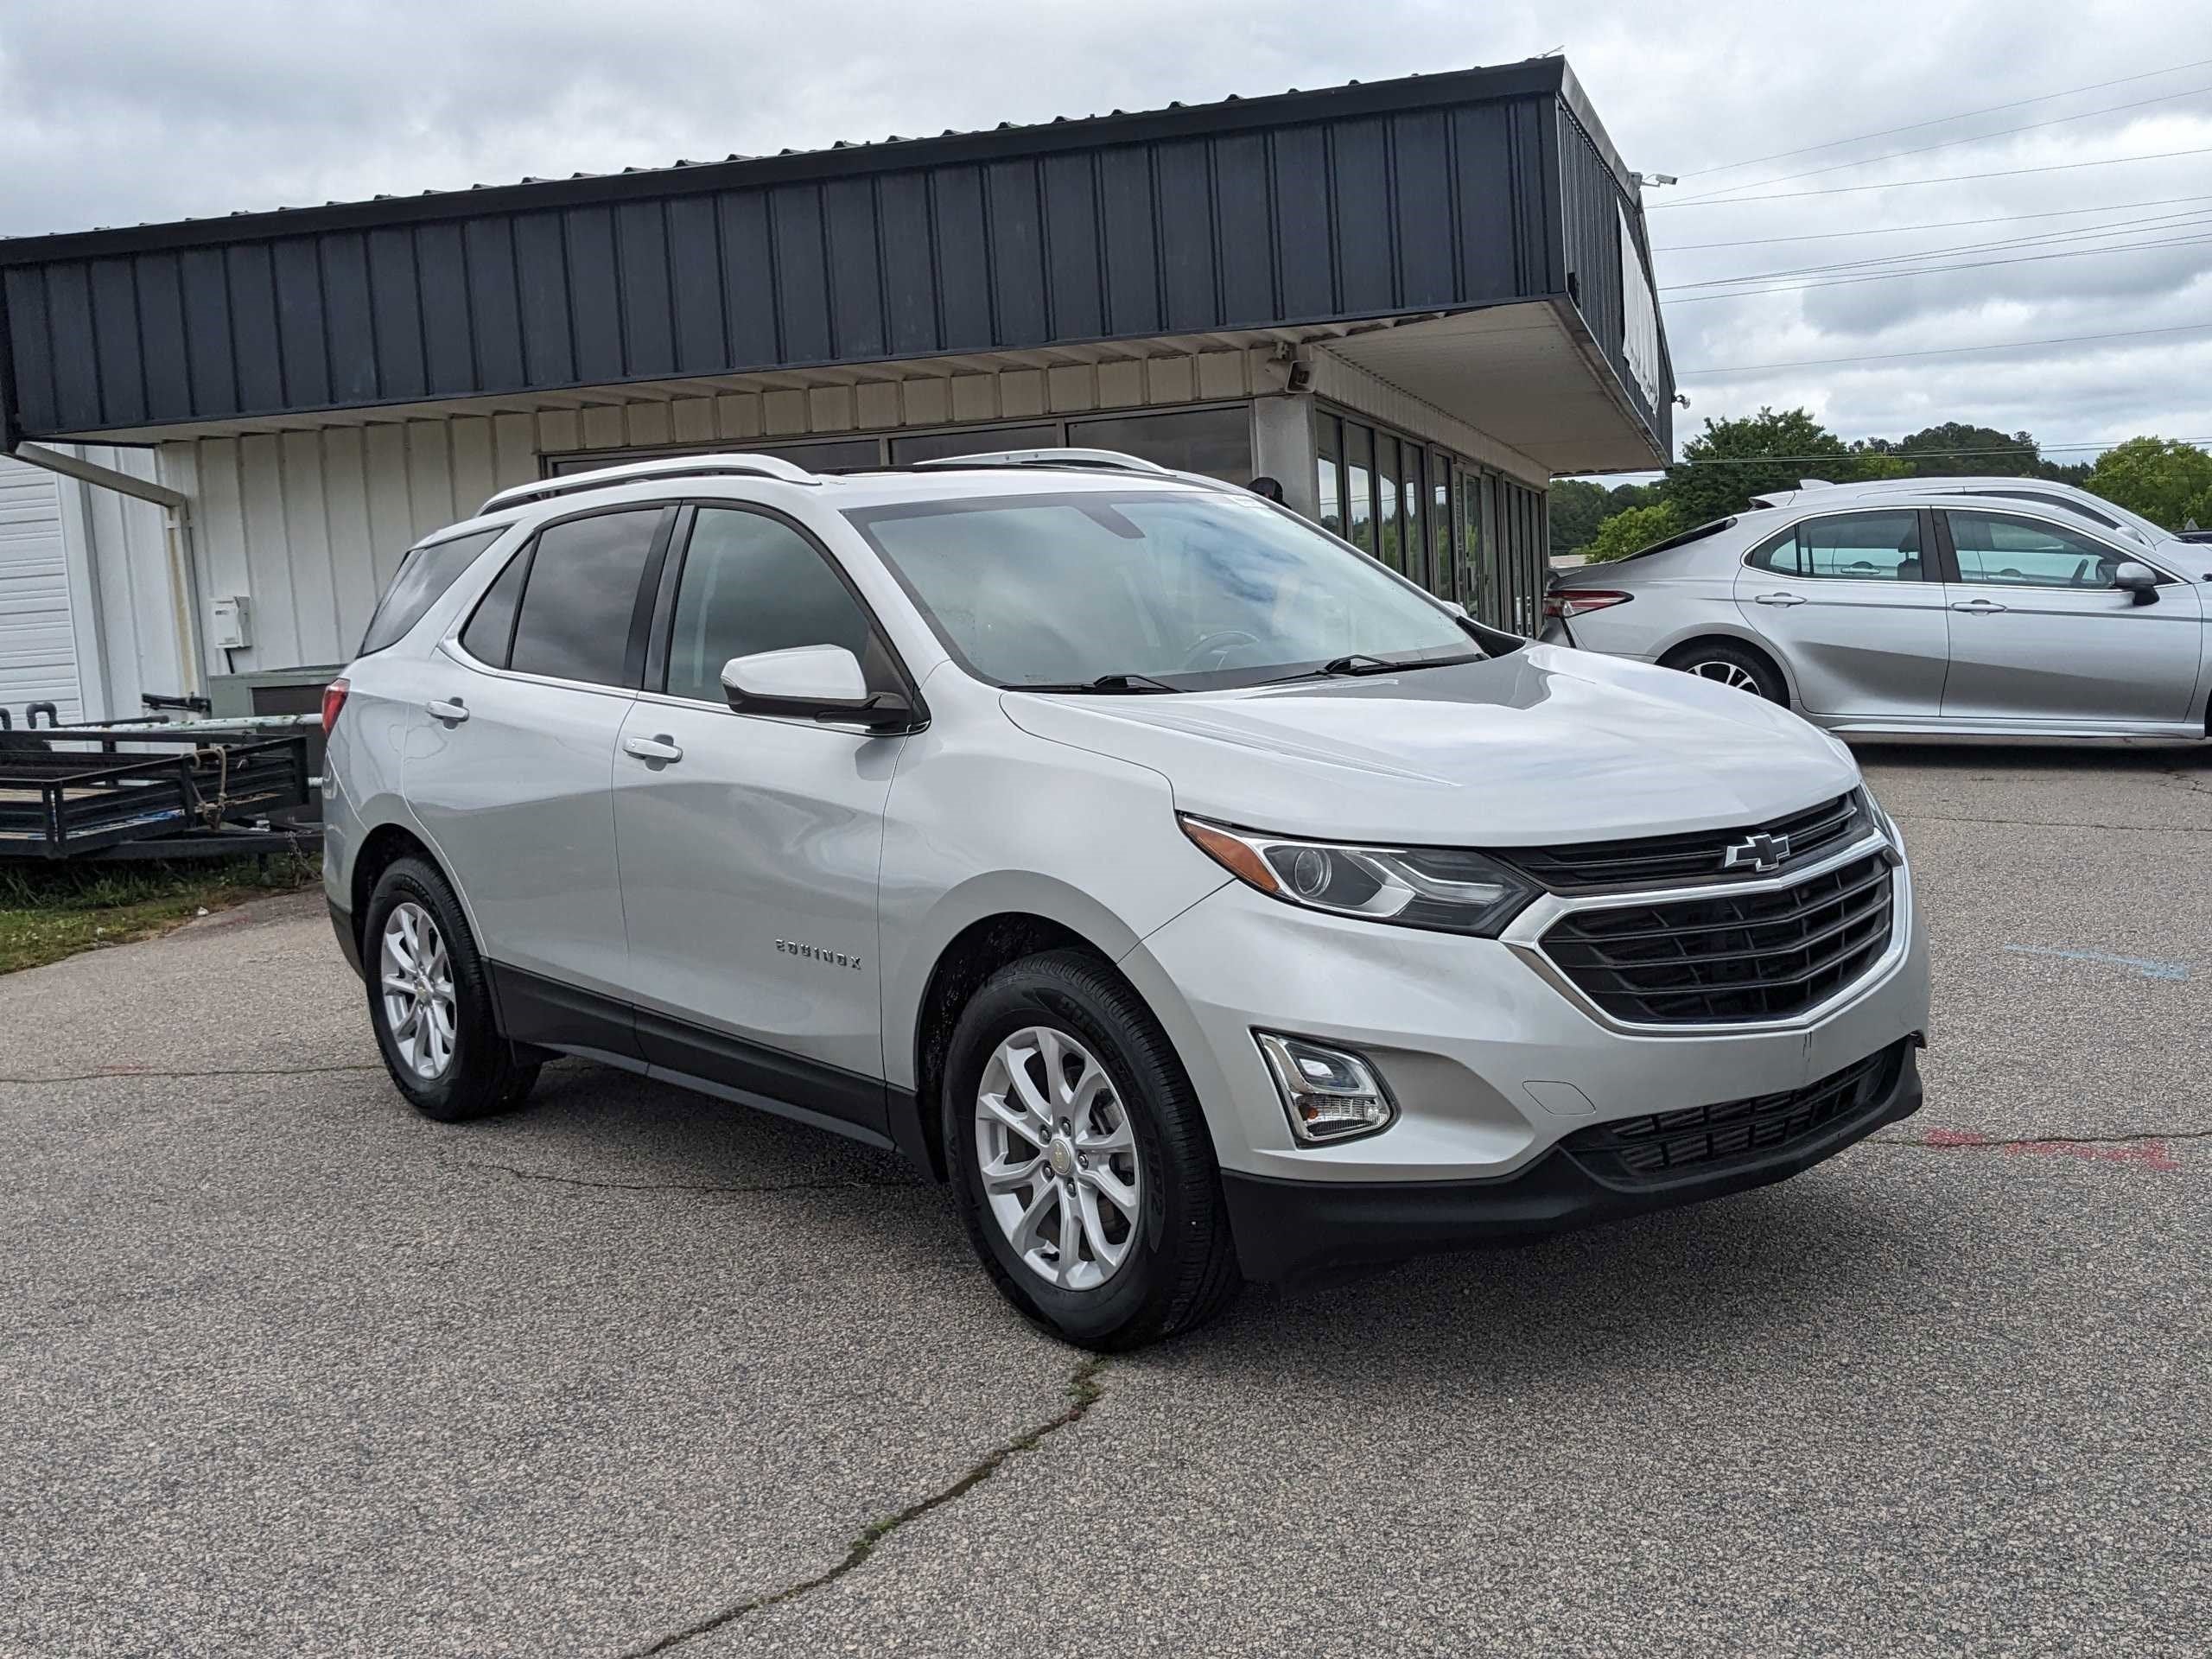 Used 2018 Chevrolet Equinox LT with VIN 3GNAXJEV3JL282625 for sale in Henderson, NC